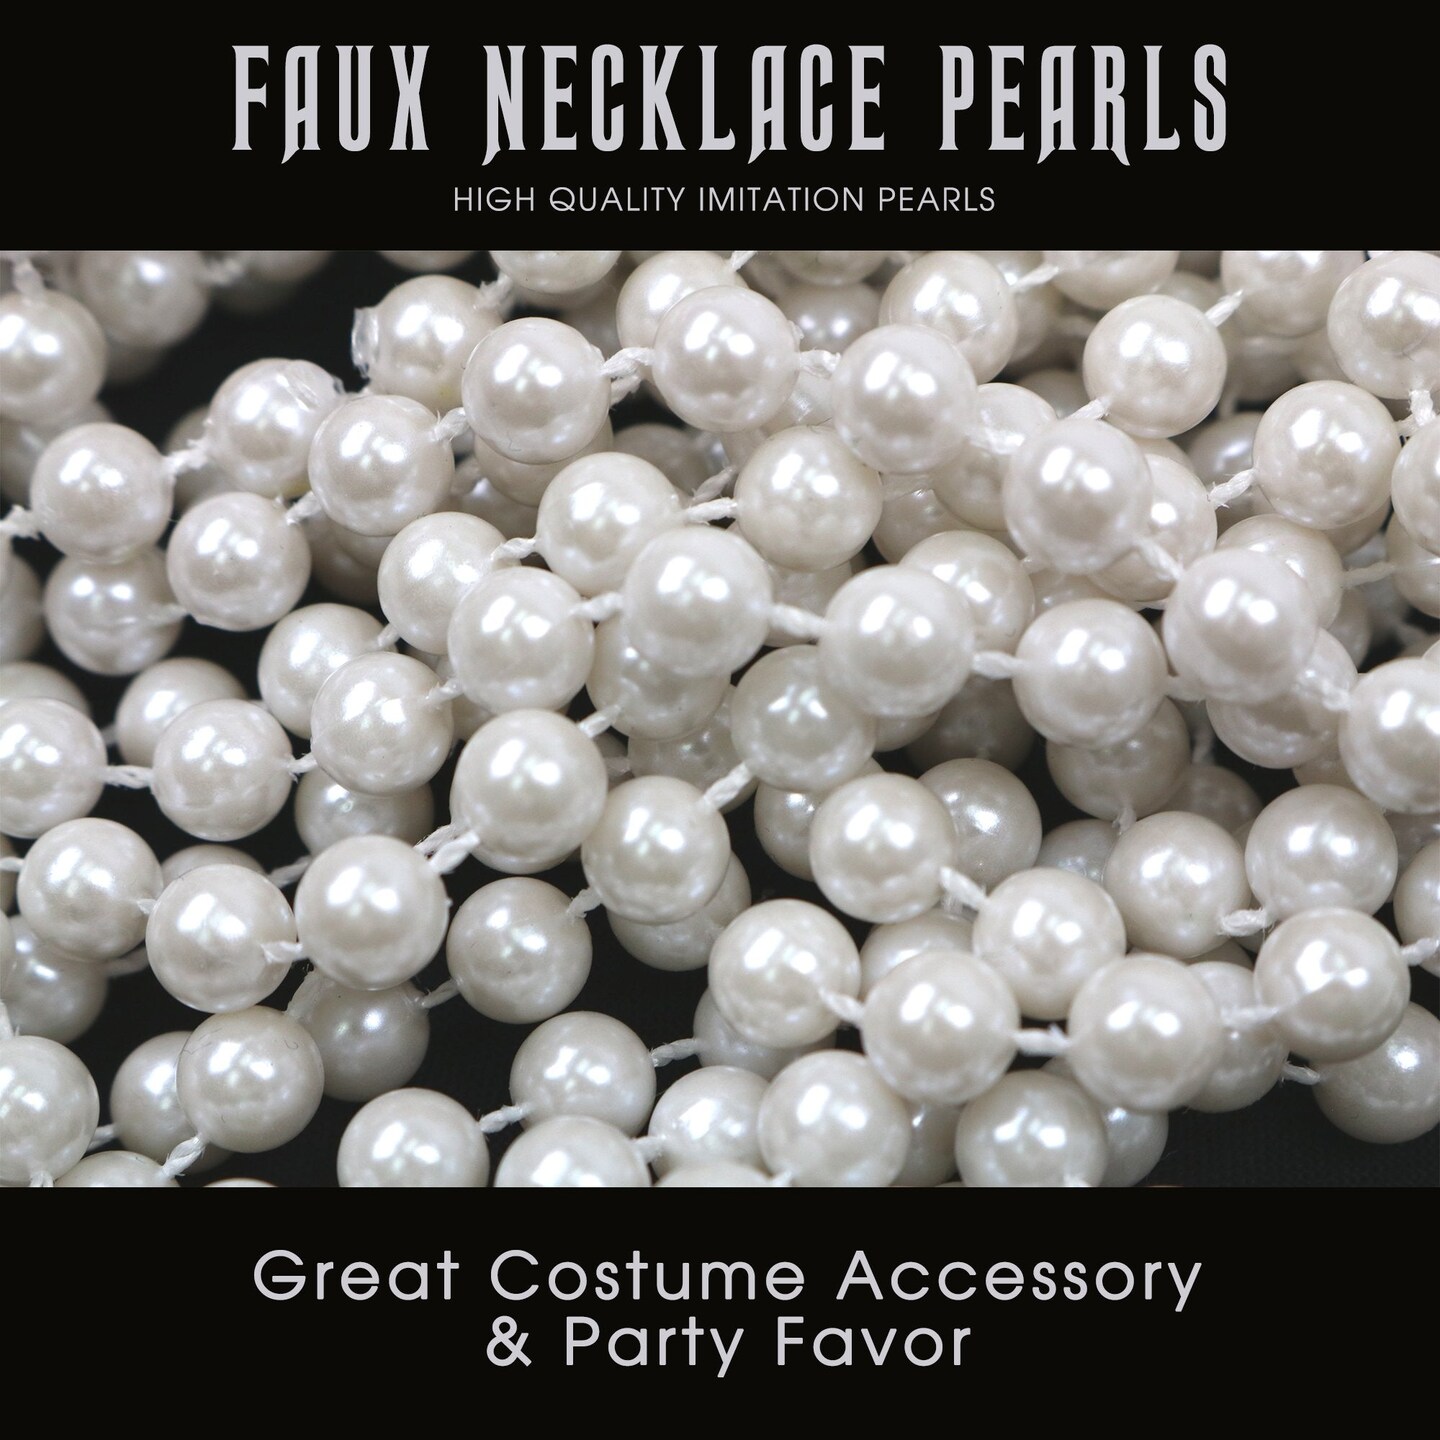 SEWACC 50pcs Pearl Accessories Bulk Charms Perals Beads Charms for  Bracelets for Making Pearls for Decoration Faux Imitation Pearl White Faux  Pearl